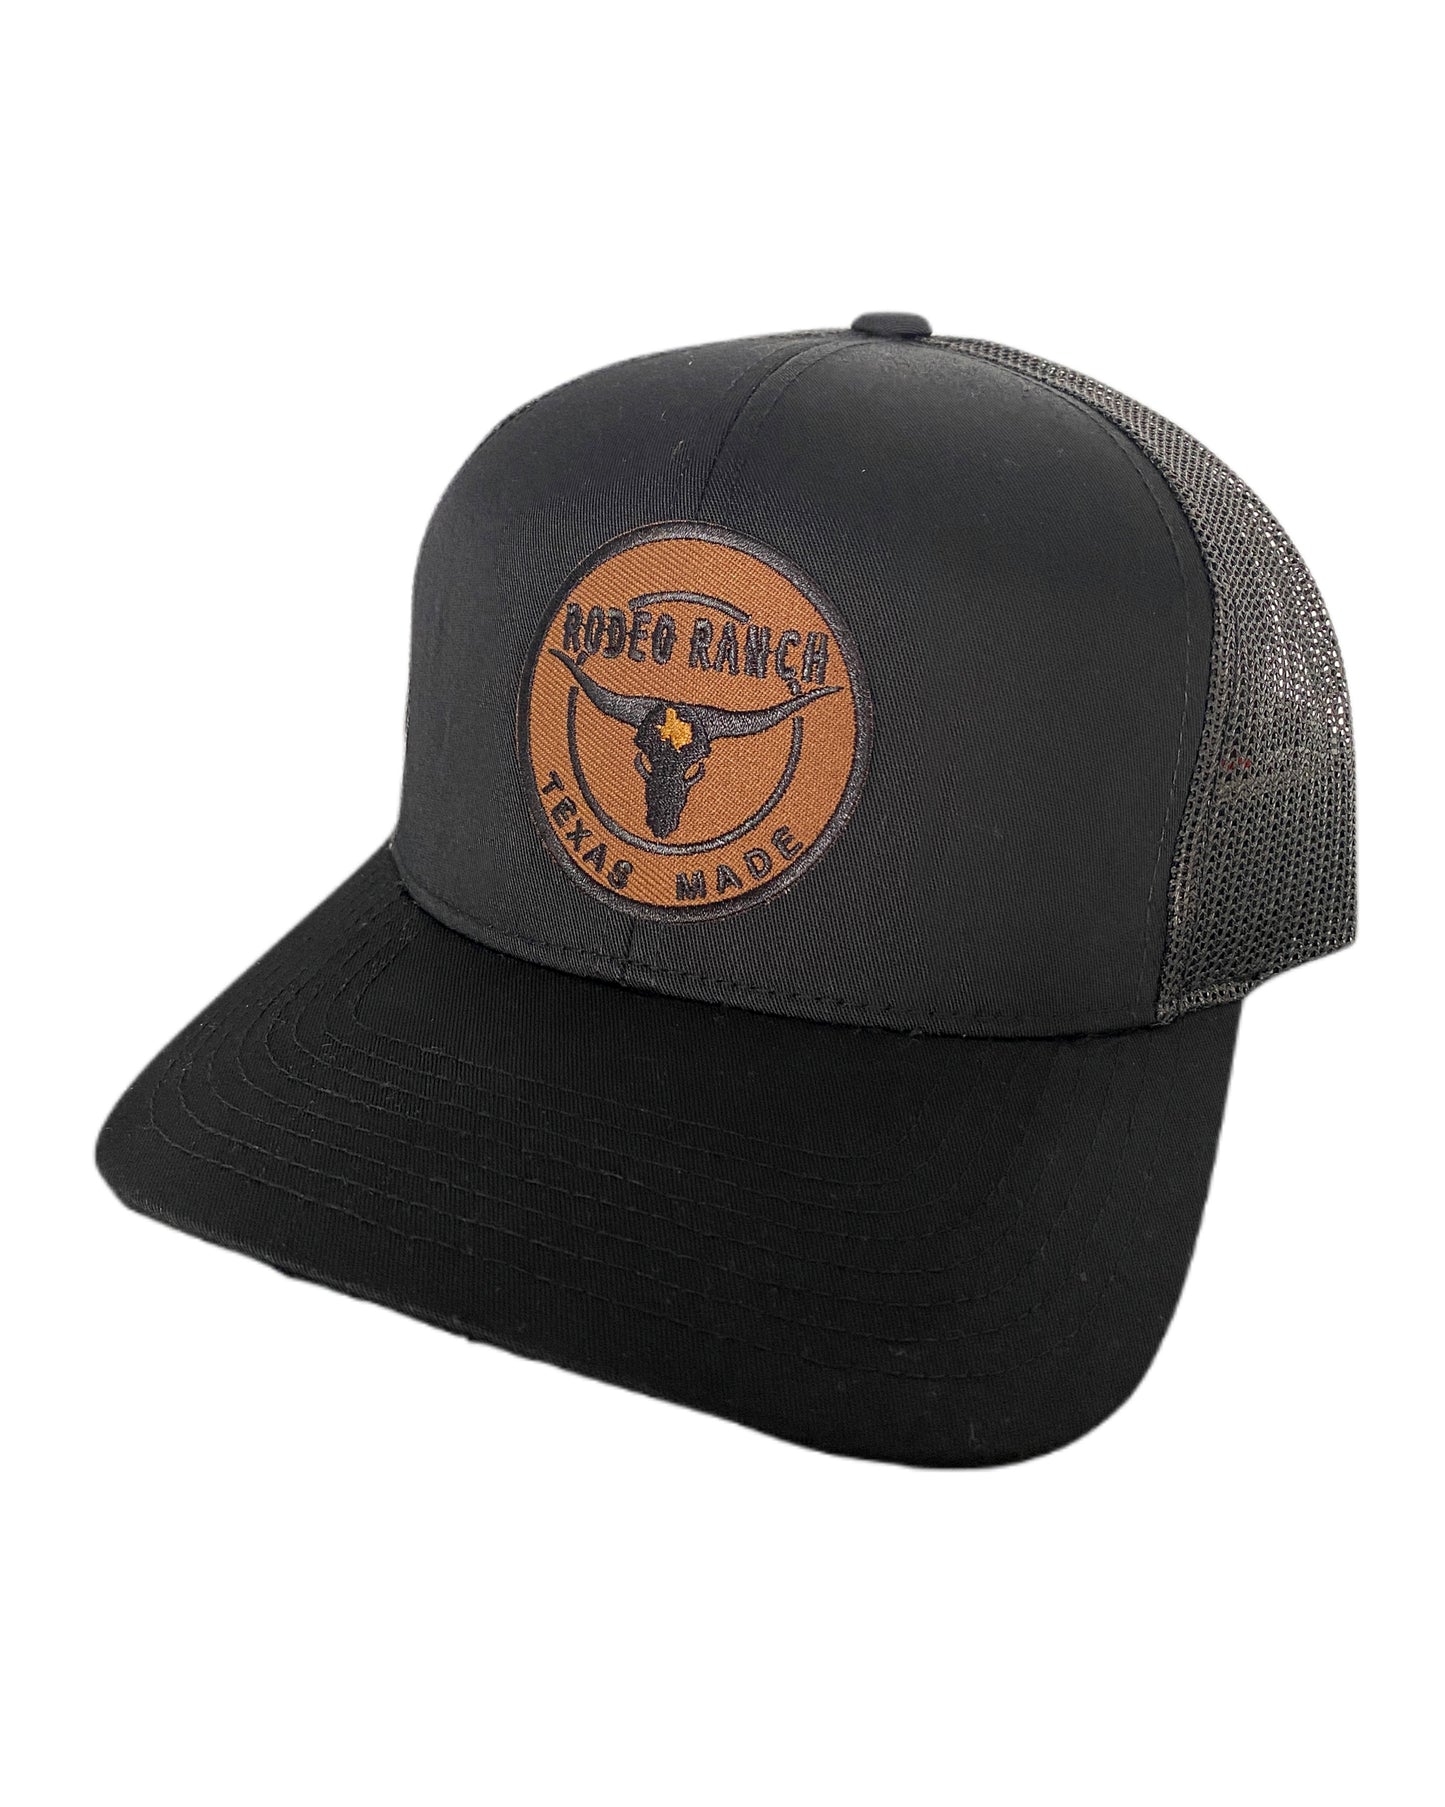 Rodeo Ranch Texas Made Hat - Black